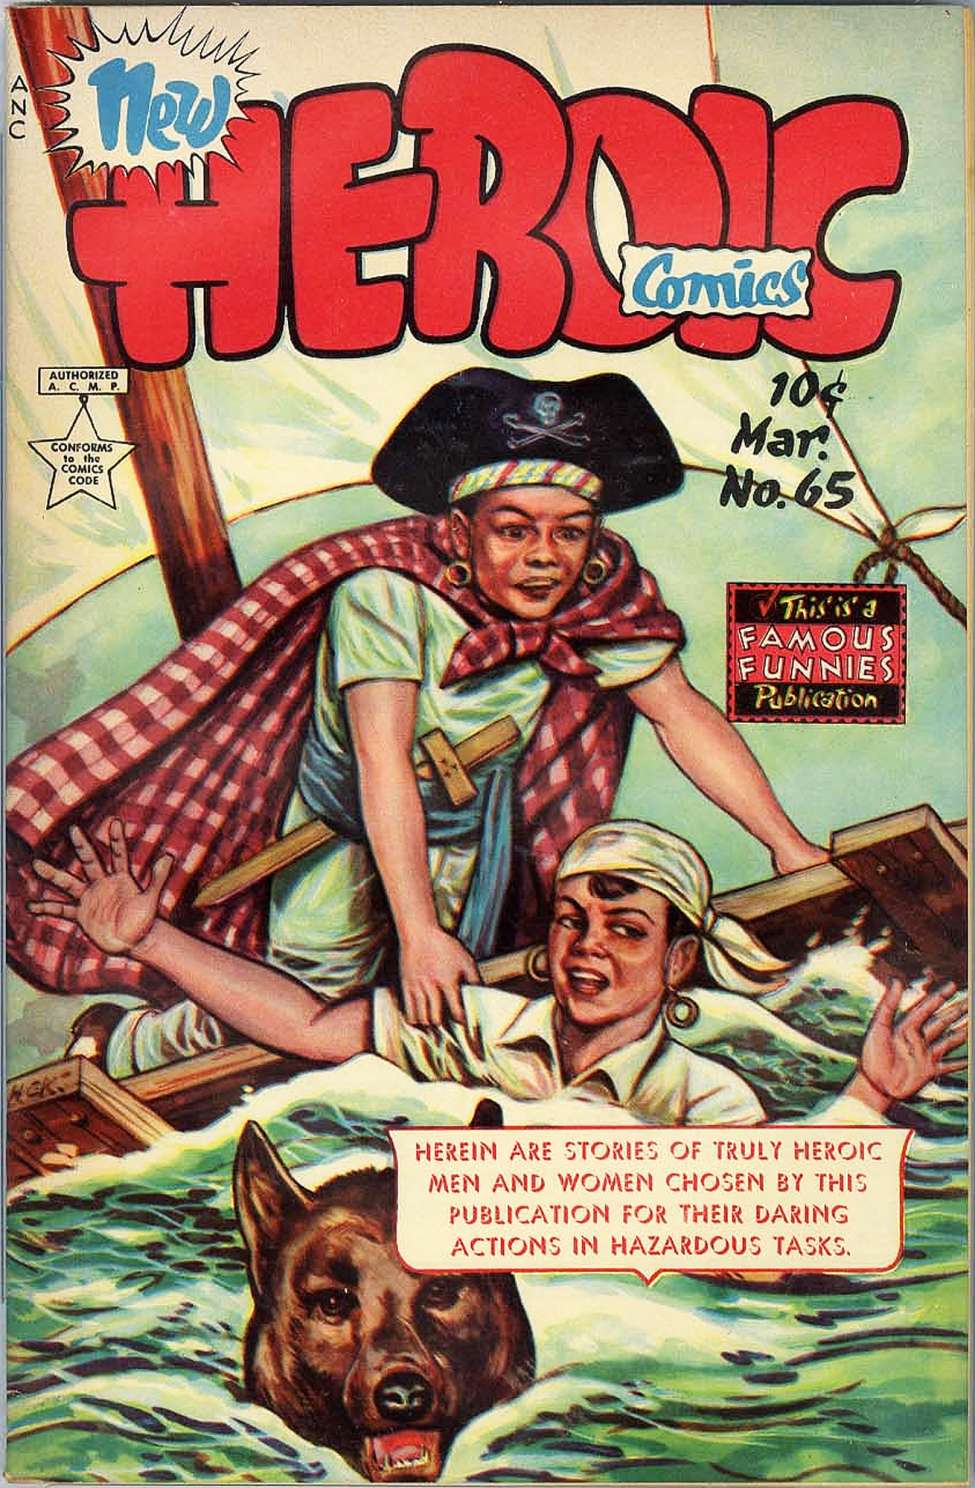 Book Cover For New Heroic Comics 65 - Version 2